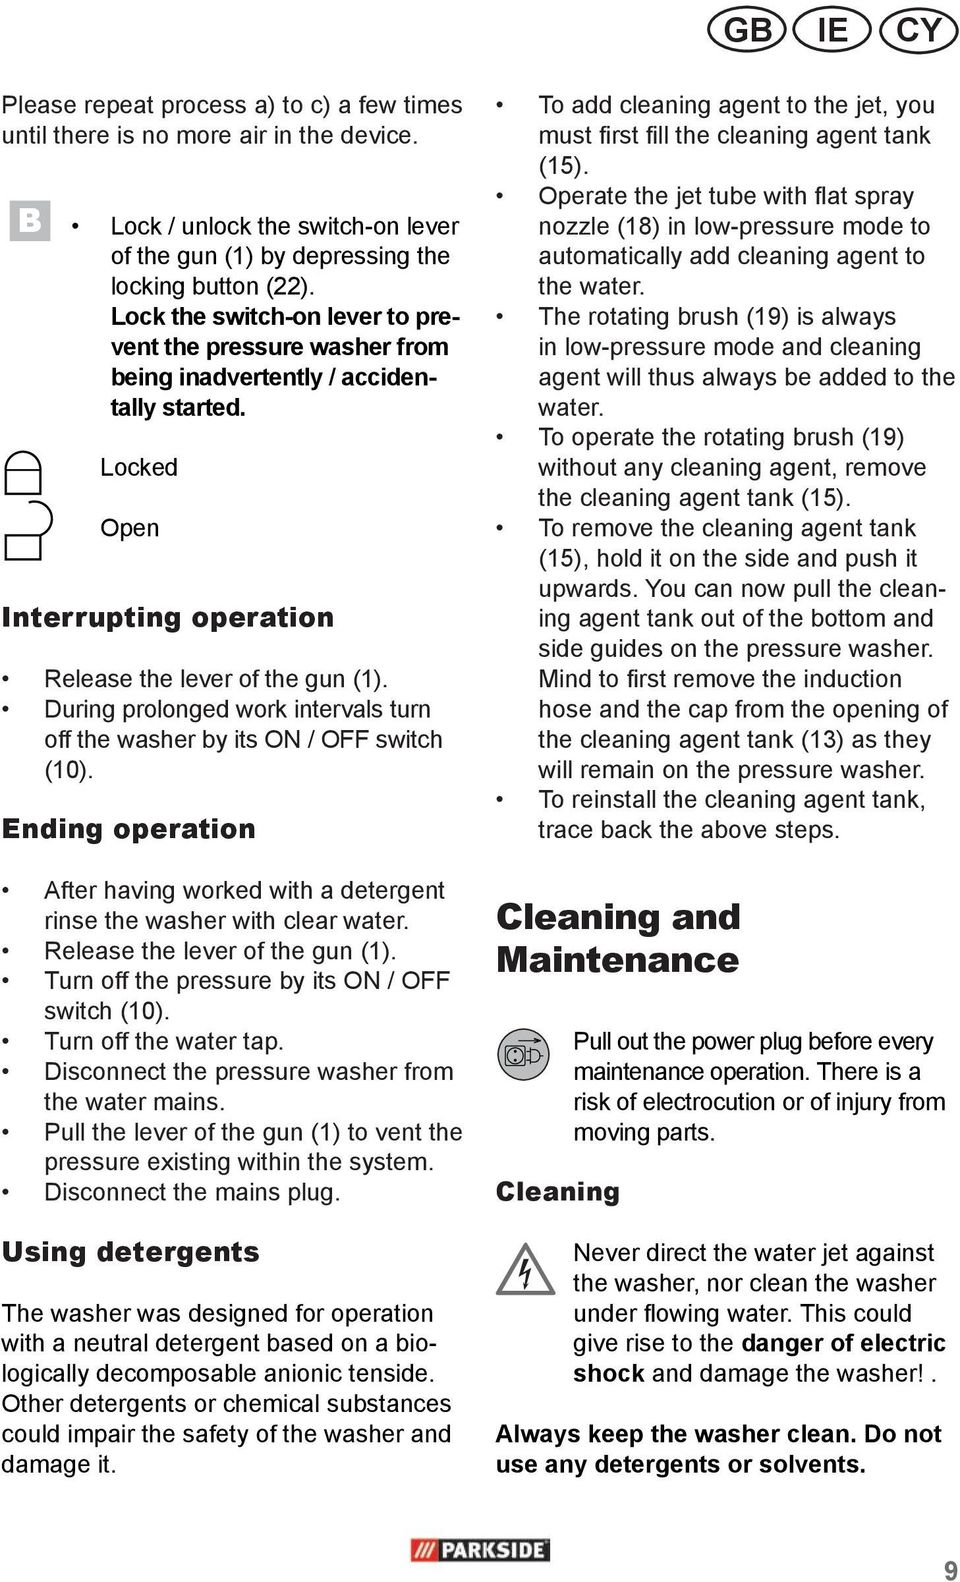 During prolonged work intervals turn off the washer by its ON / OFF switch (10). Ending operation After having worked with a detergent rinse the washer with clear water.